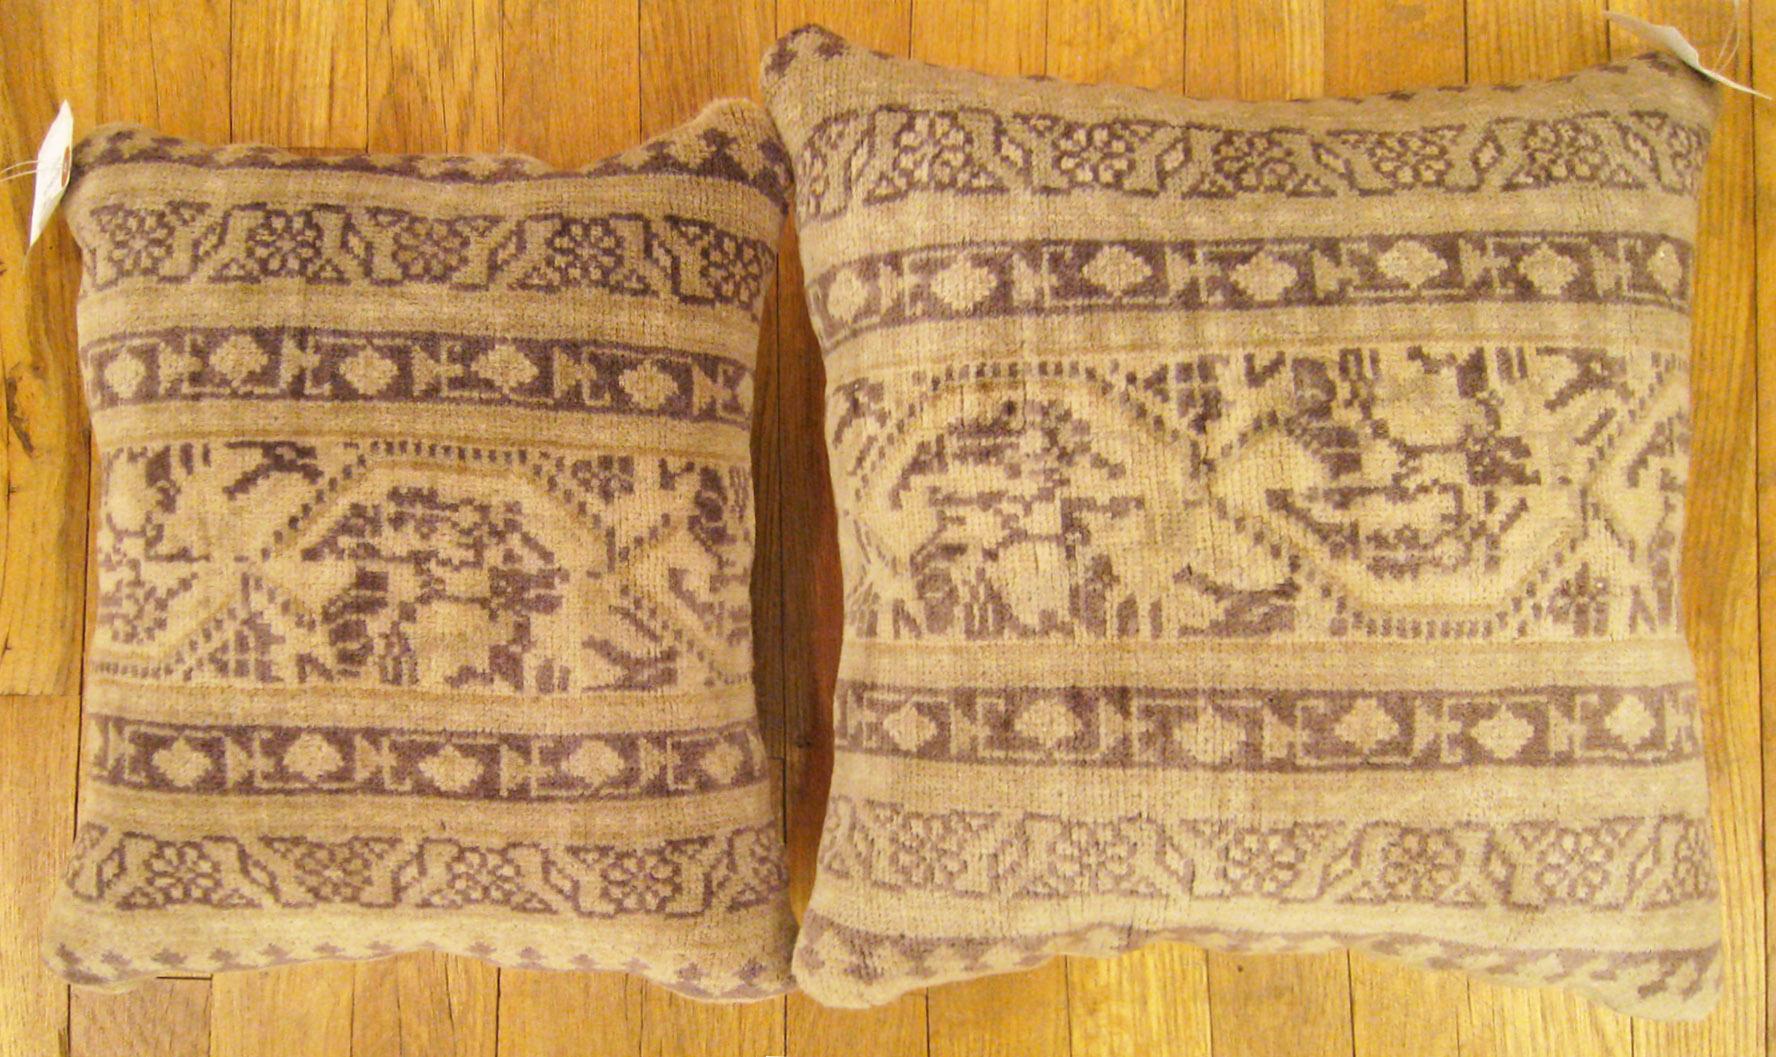 A pair of antique Indian Agra carpet pillows ; Size 1'2” x 1'0” and 1'3” x 1'3”.

An antique decorative pillows with geometric abstracts allover a cream central field, size 1'2” x 1'0” and 1'3” x 1'3”. This lovely decorative pillow features an